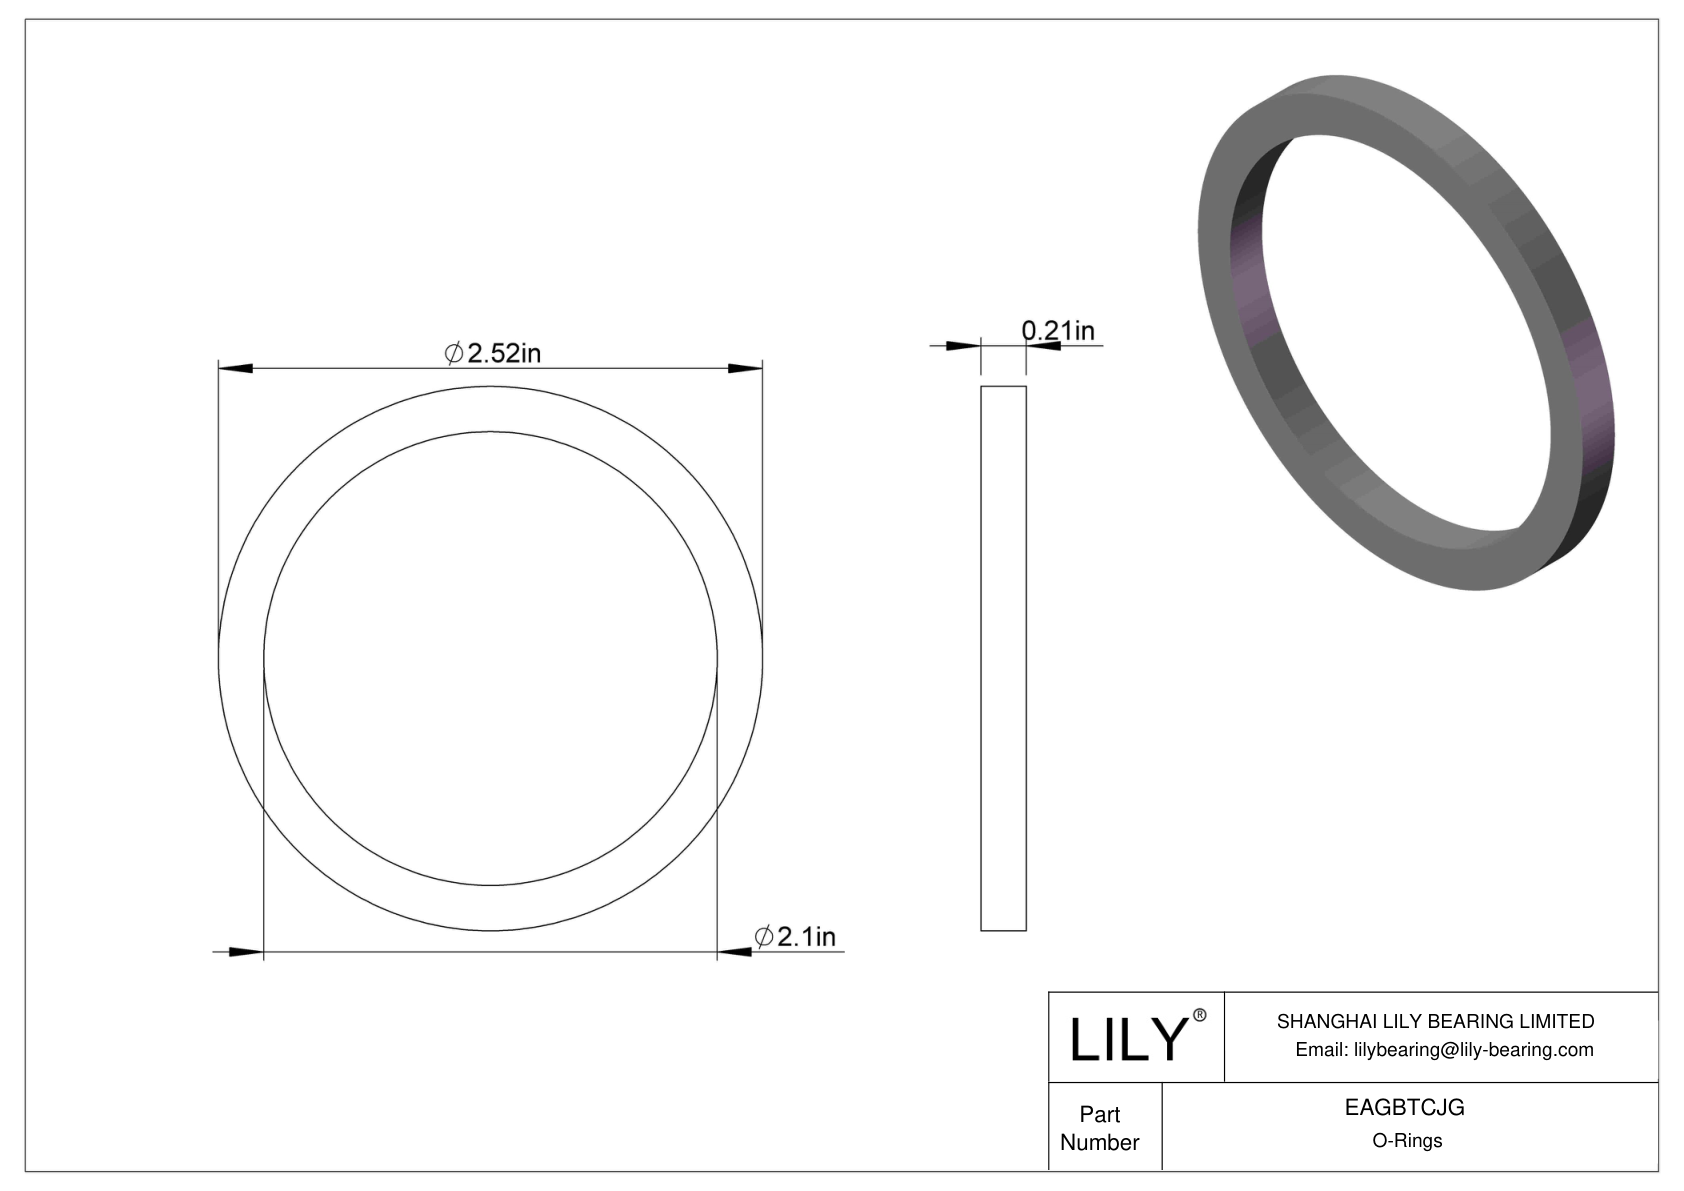 EAGBTCJG Oil Resistant O-Rings Square cad drawing